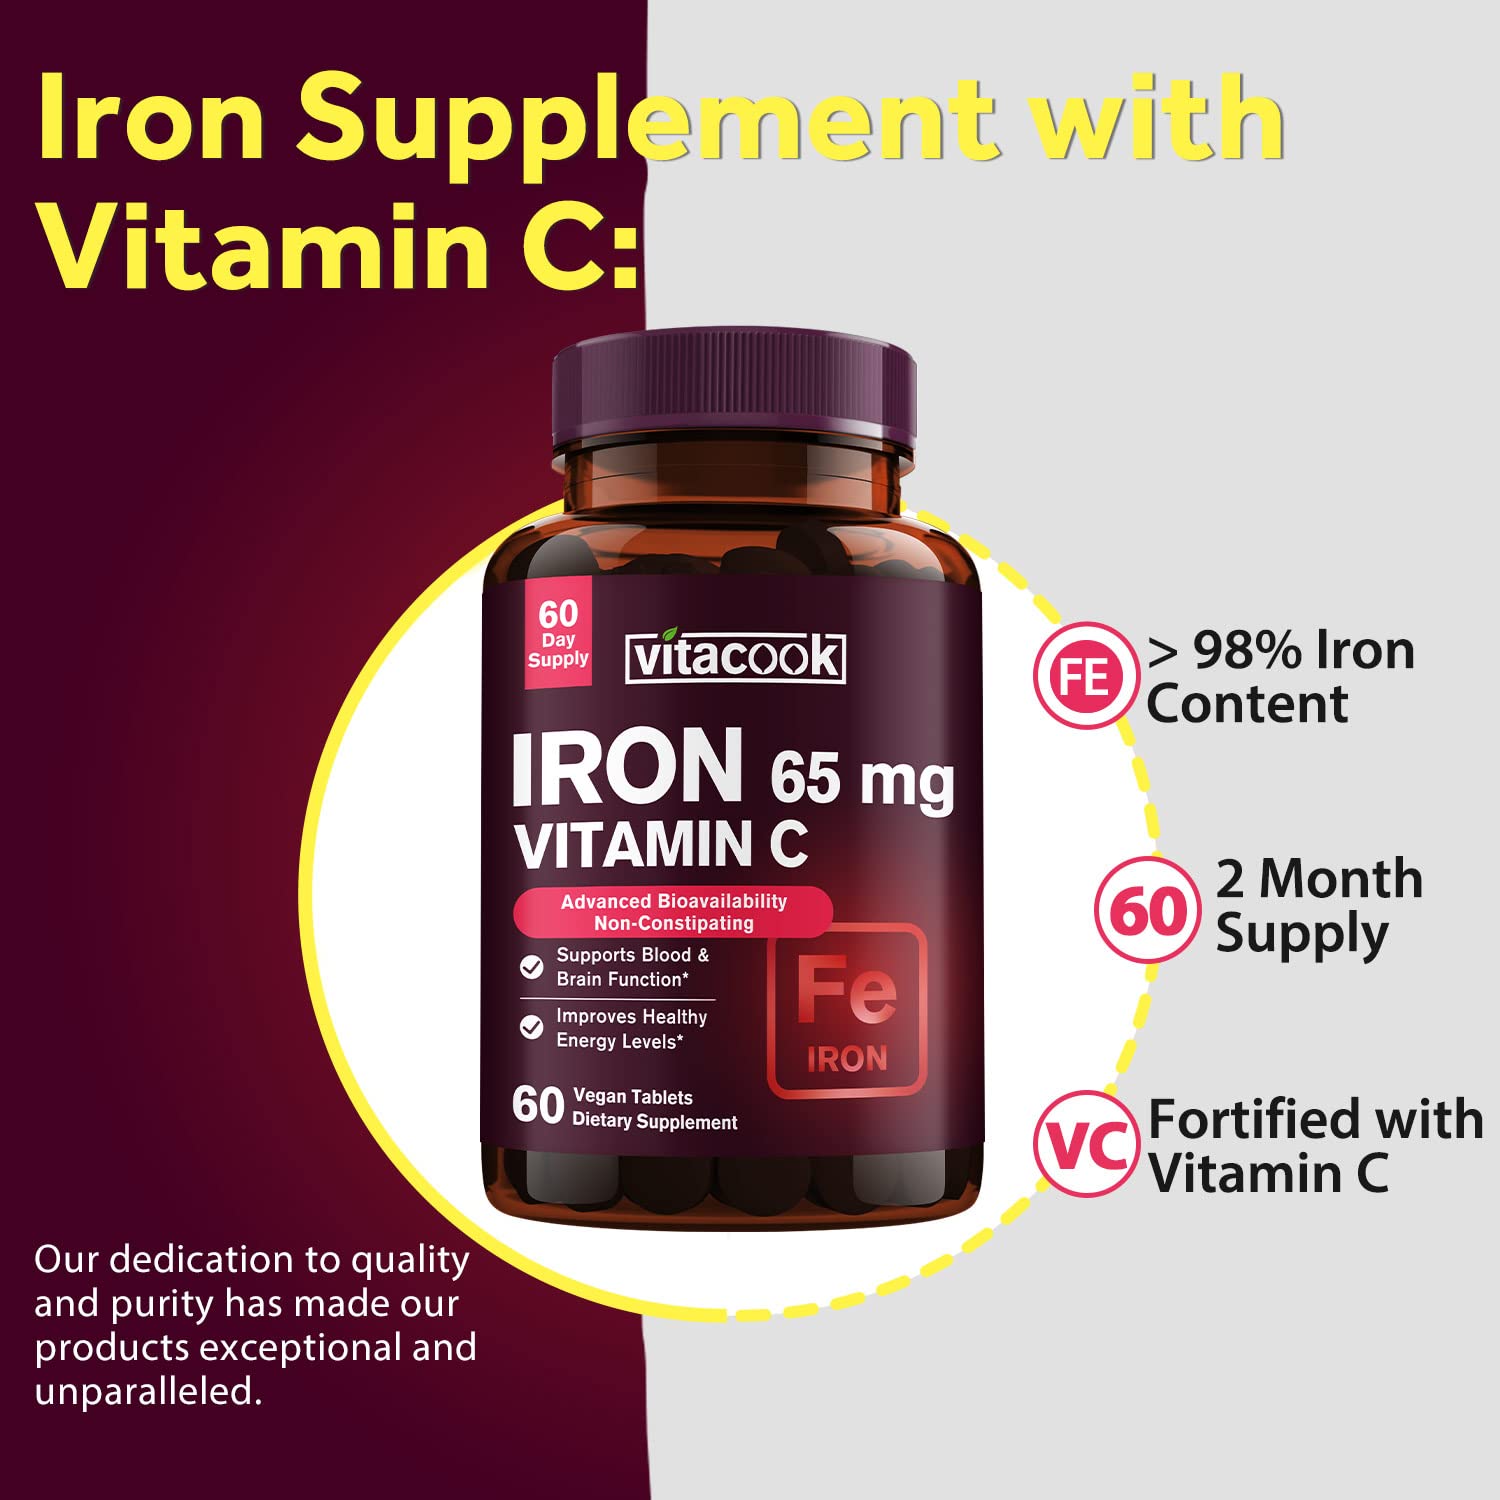 Vitacook Iron Supplement for Women and Men, High Potency Iron with Vitamin C, Blood, Energy, Muscle & Immune System Support, Vegan, 60 Count